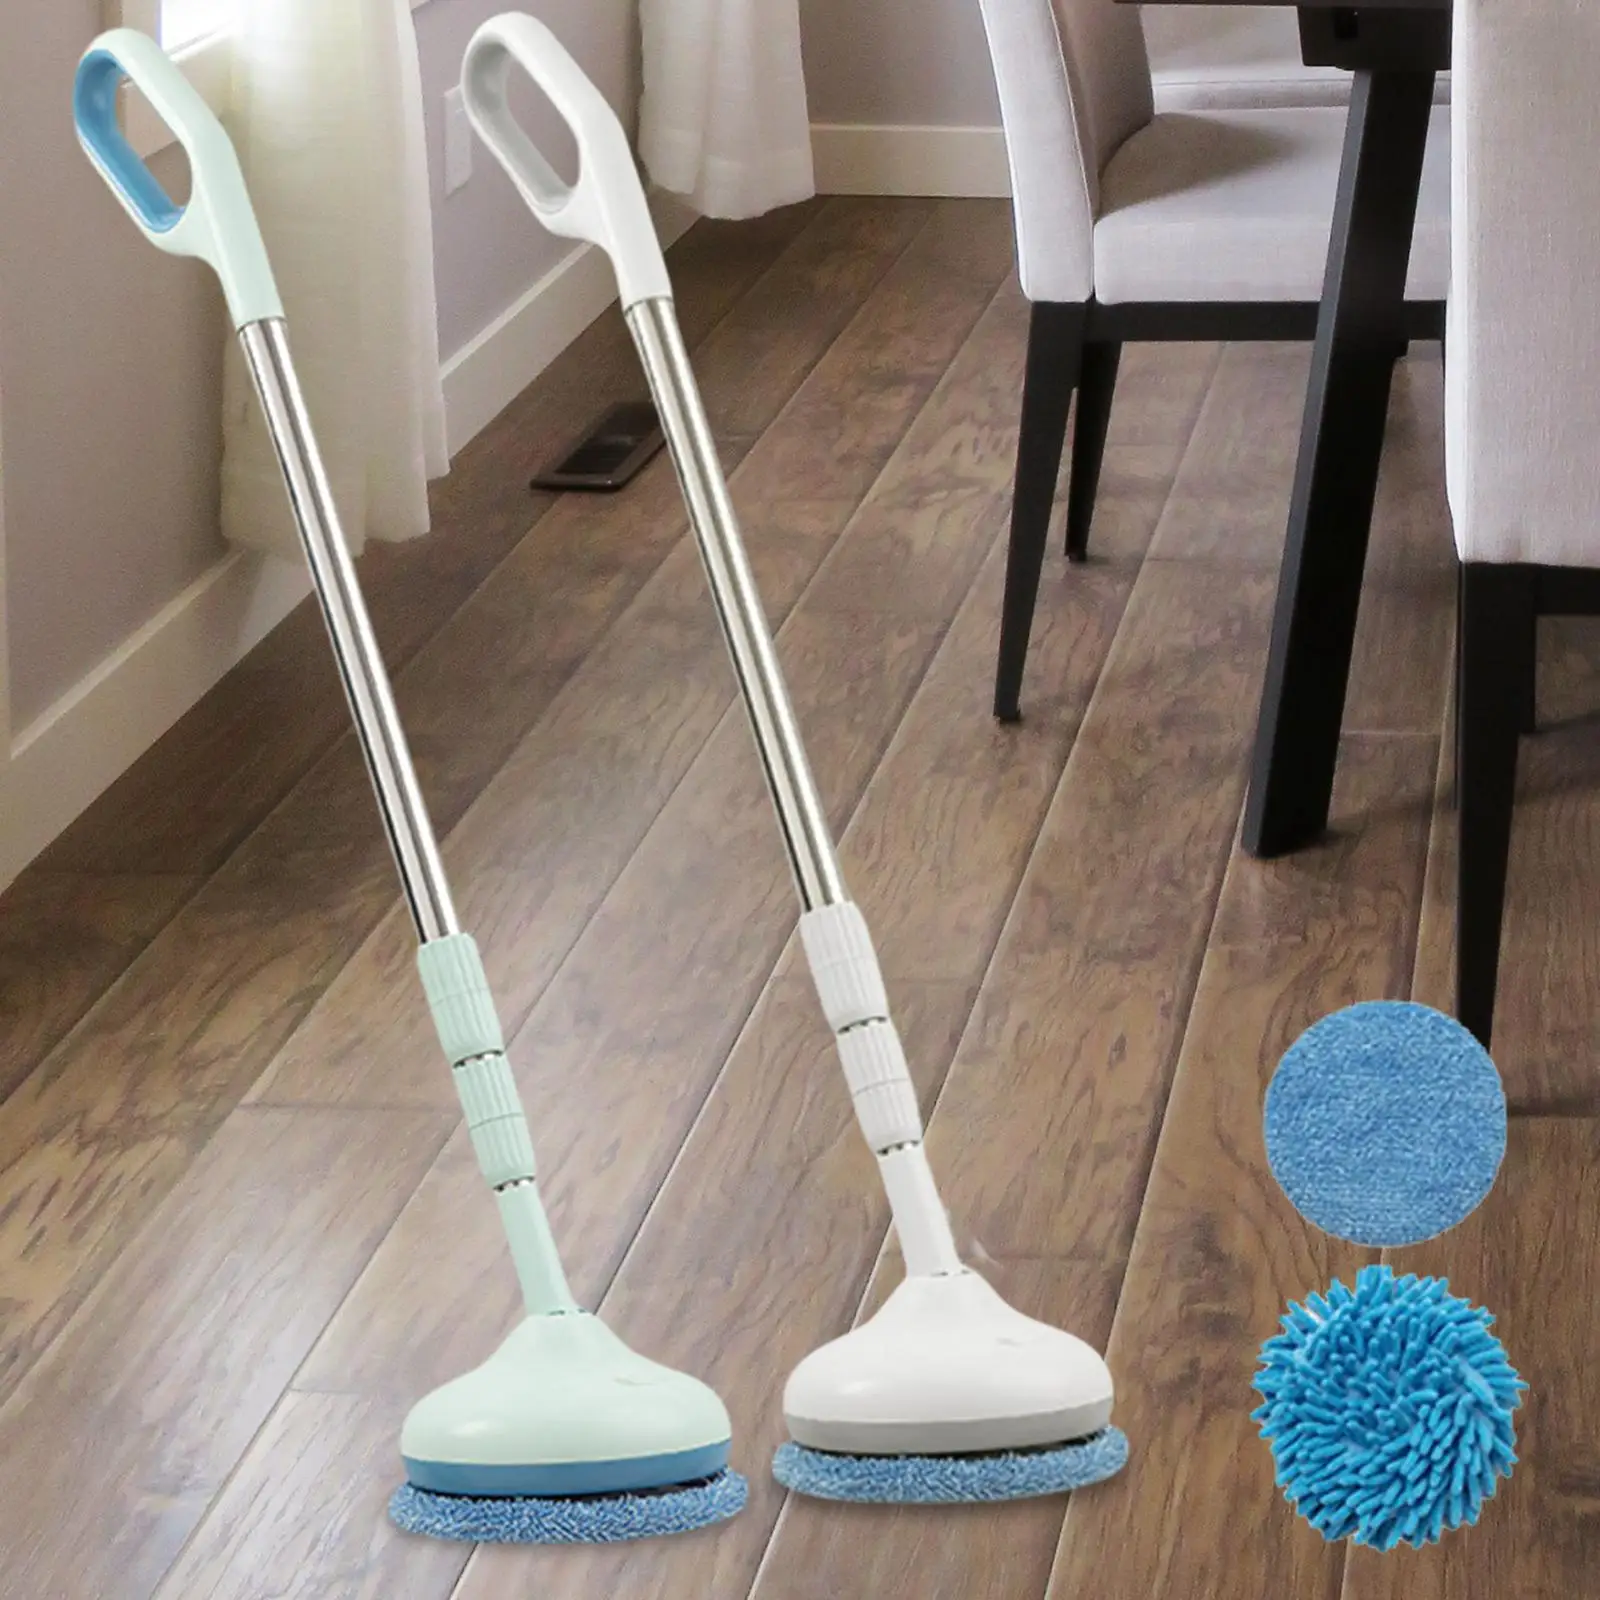 Spin Electric Window Cleaner Mop Floor Cleaner with Extension Rod Stainless Steel Rechargeable Car Washing Artifact for Bathroom